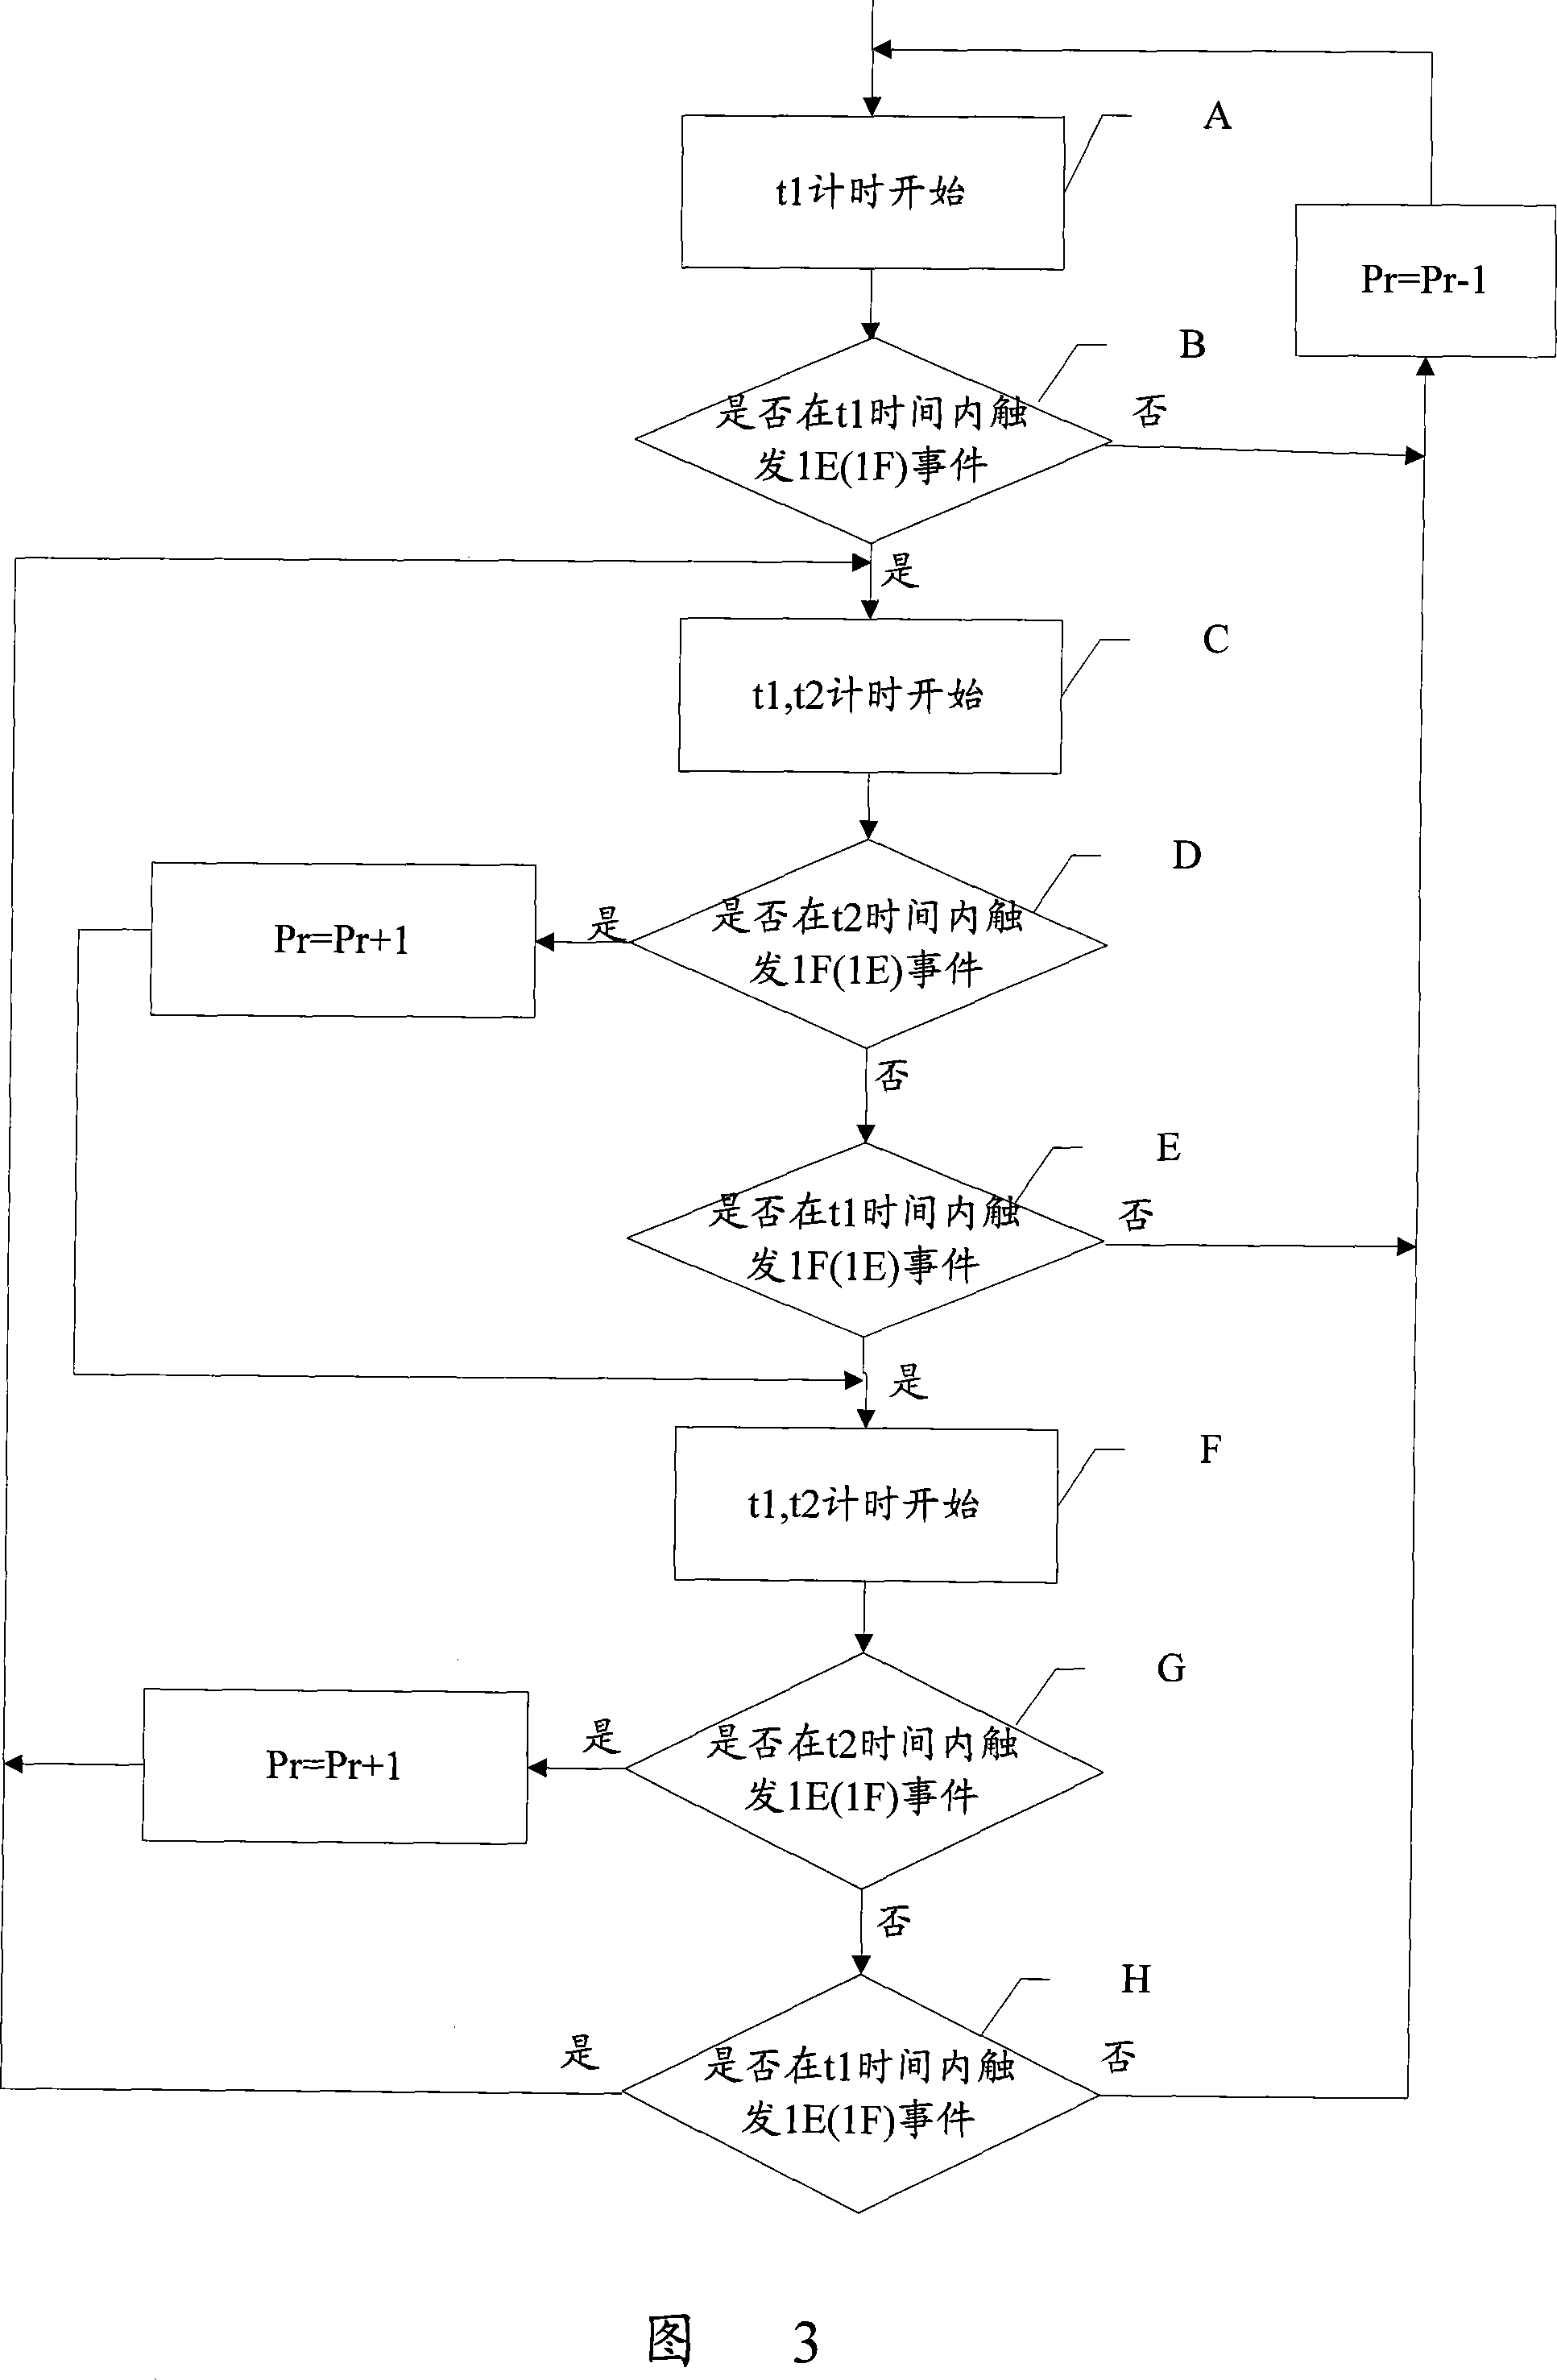 An identification method for destination switching cell